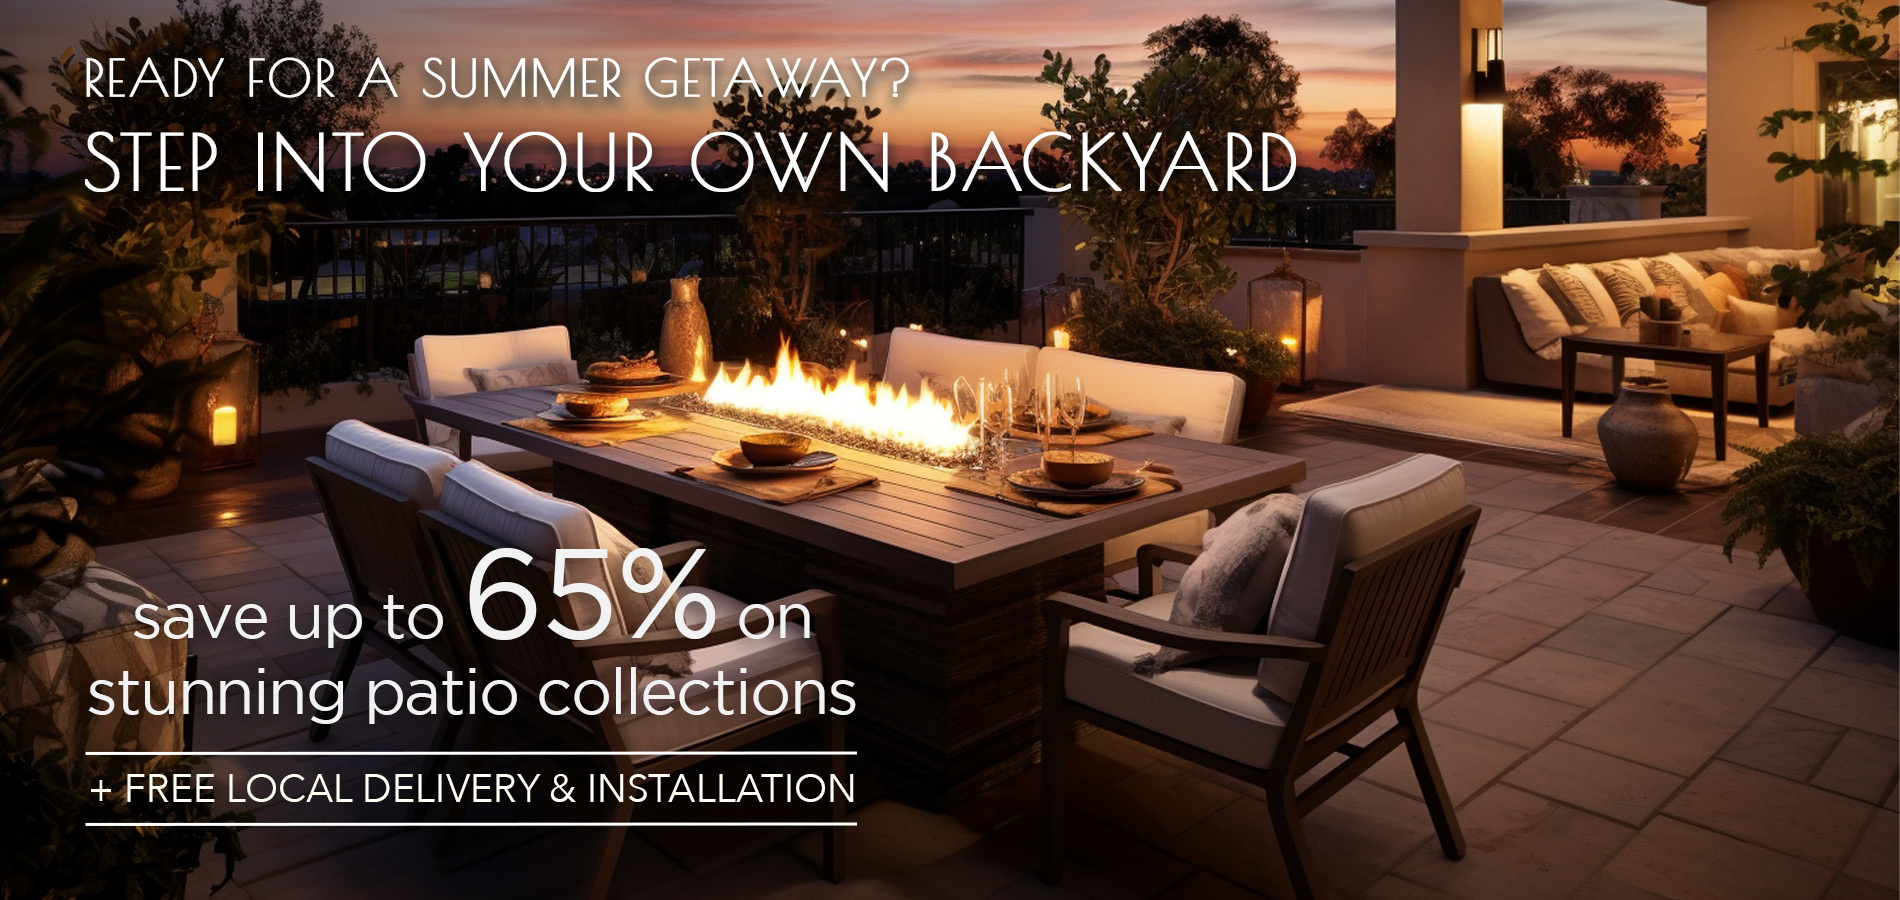 Ready for your summer getaway? Step into your own backyard. Save up to 65% on stunning patio collections, plus free local delivery and installation